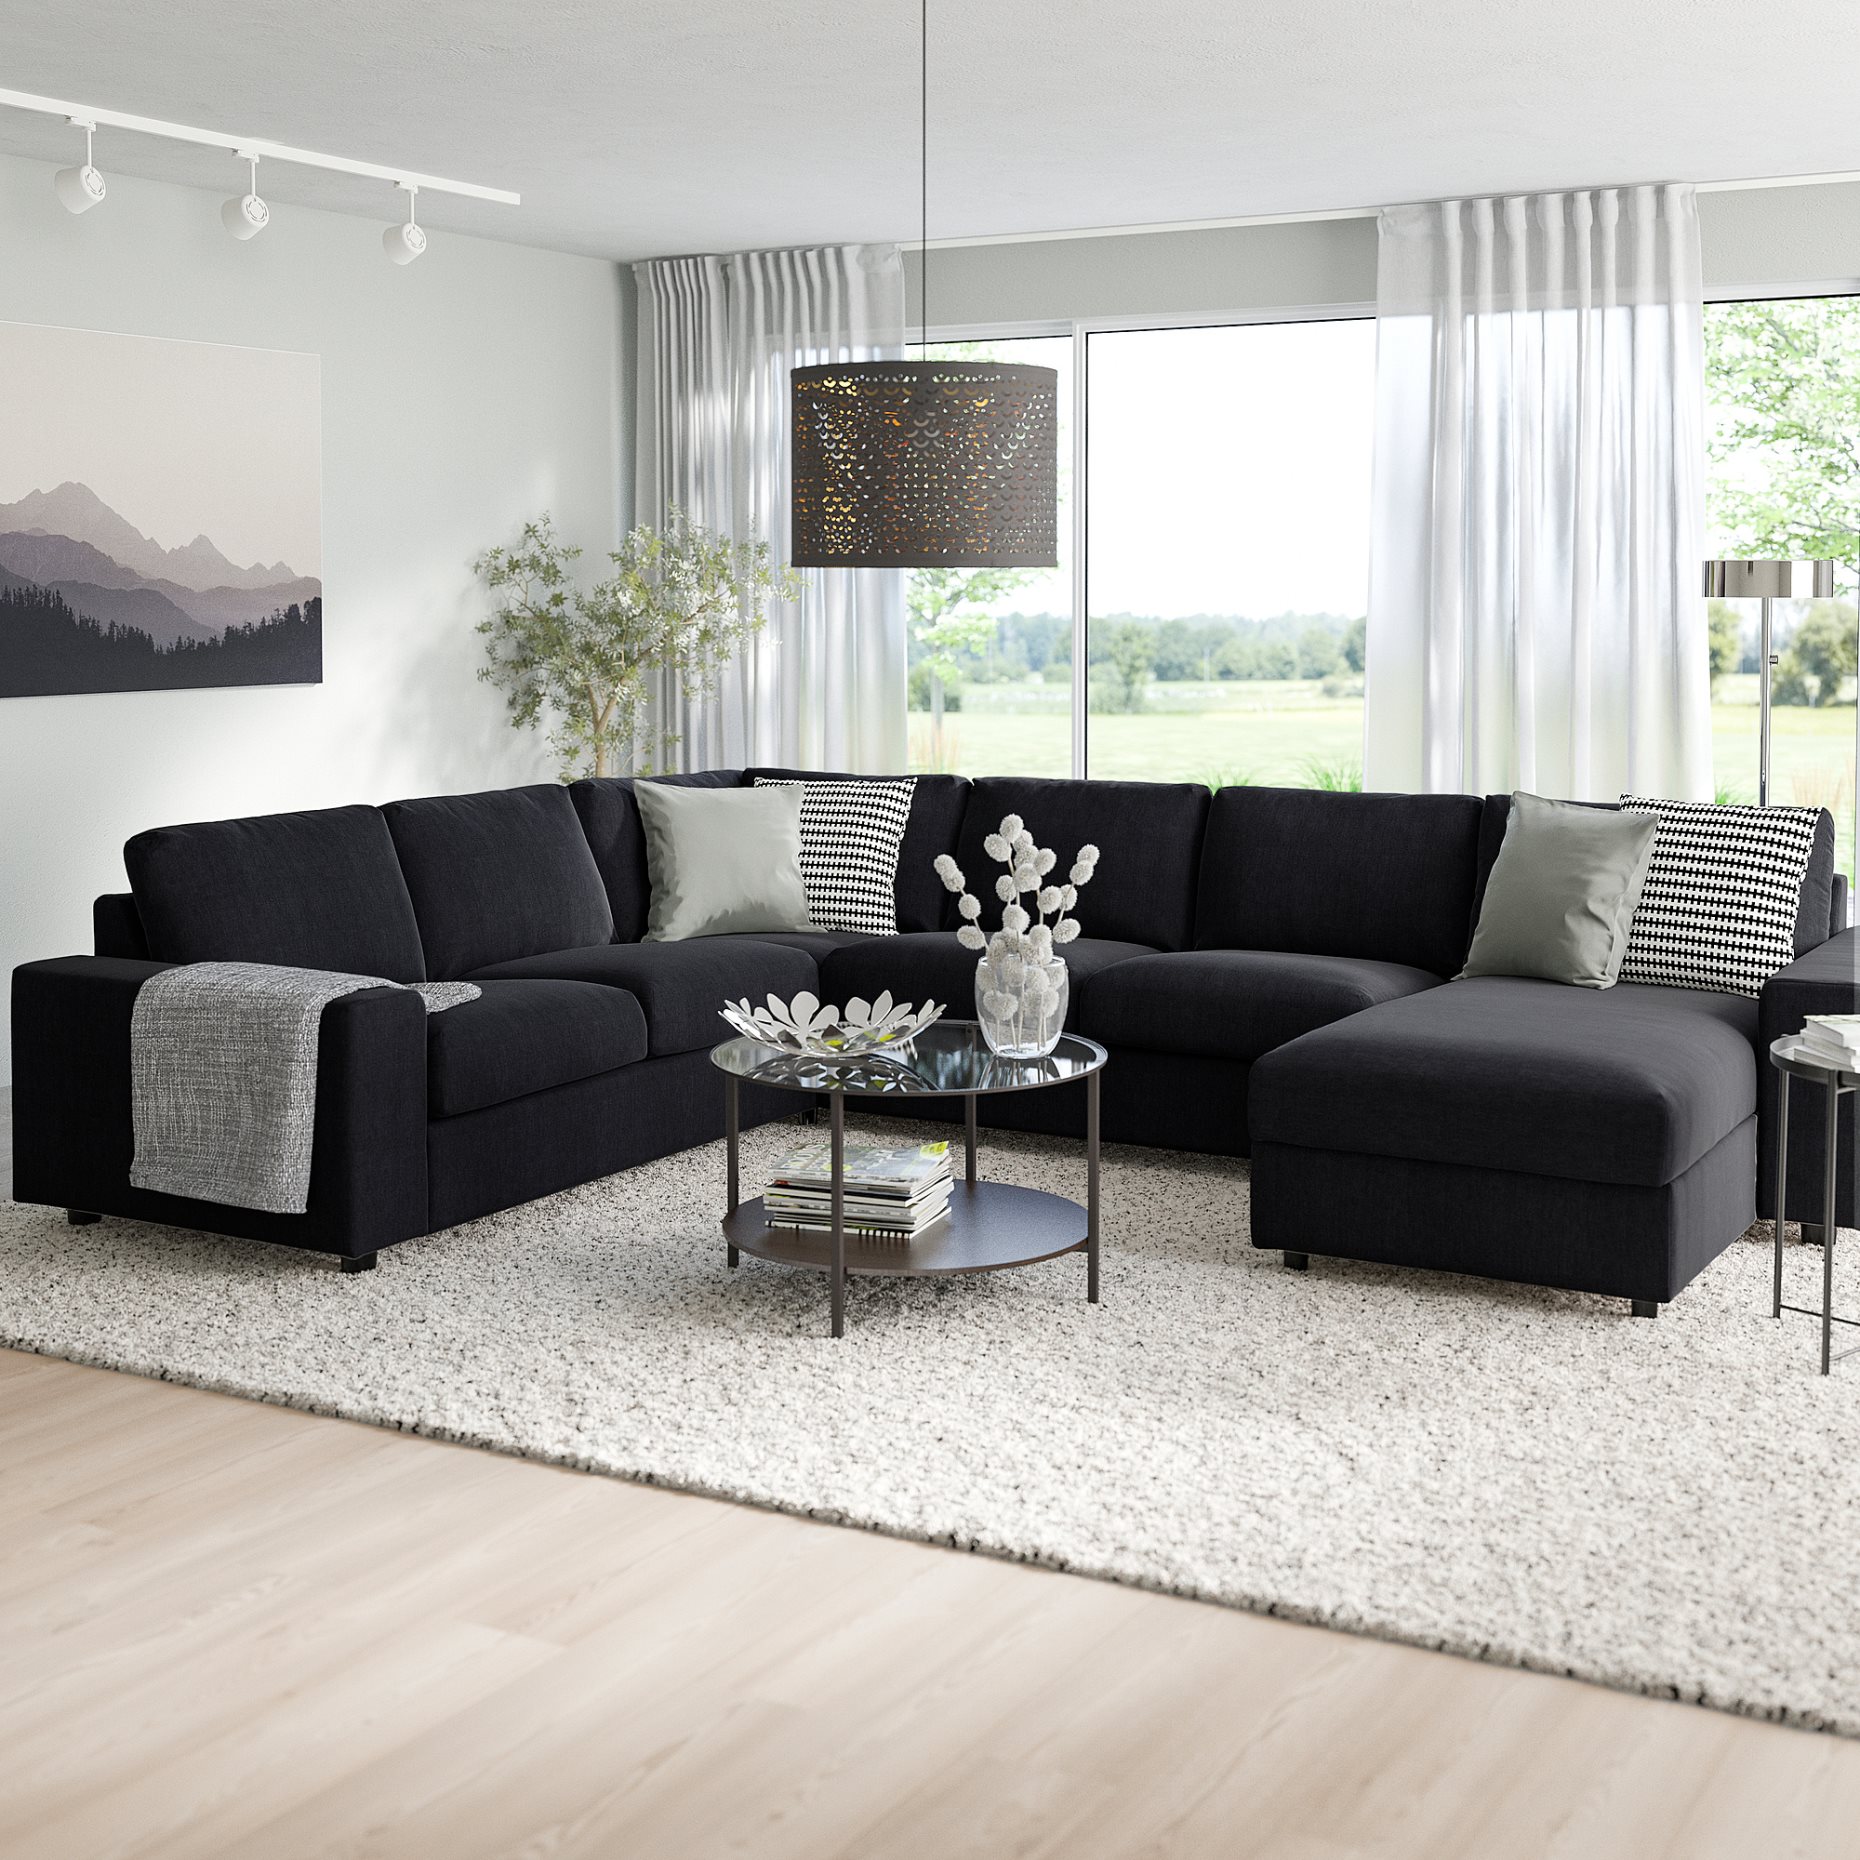 VIMLE, corner sofa-bed with wide armrests, 5-seat with chaise longue, 595.371.79